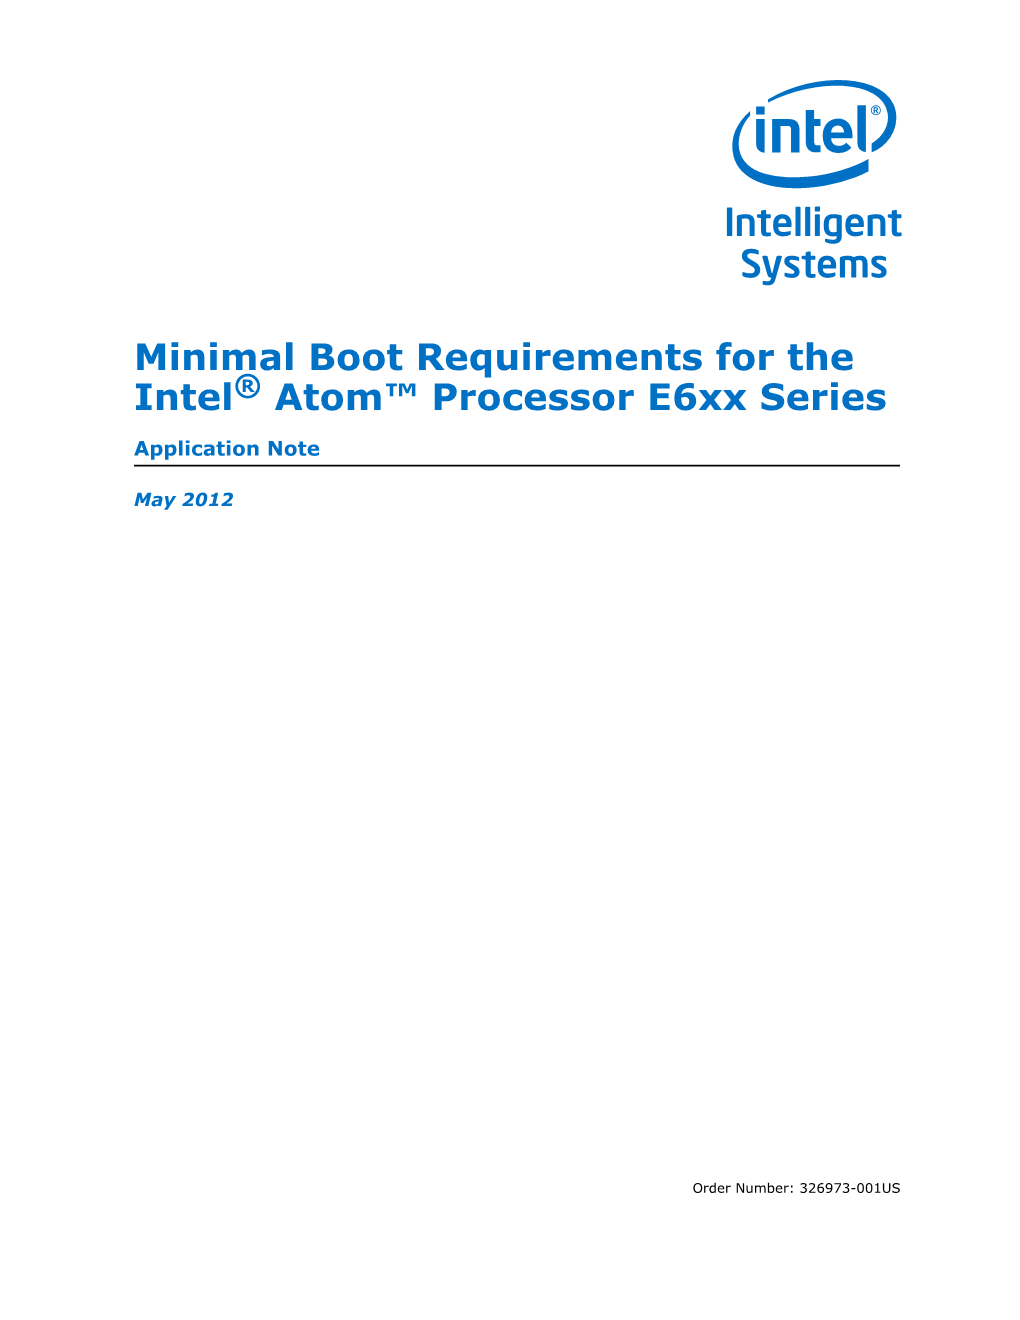 Minimal Boot Requirements for the Intel® Atom™ Processor E6xx Series